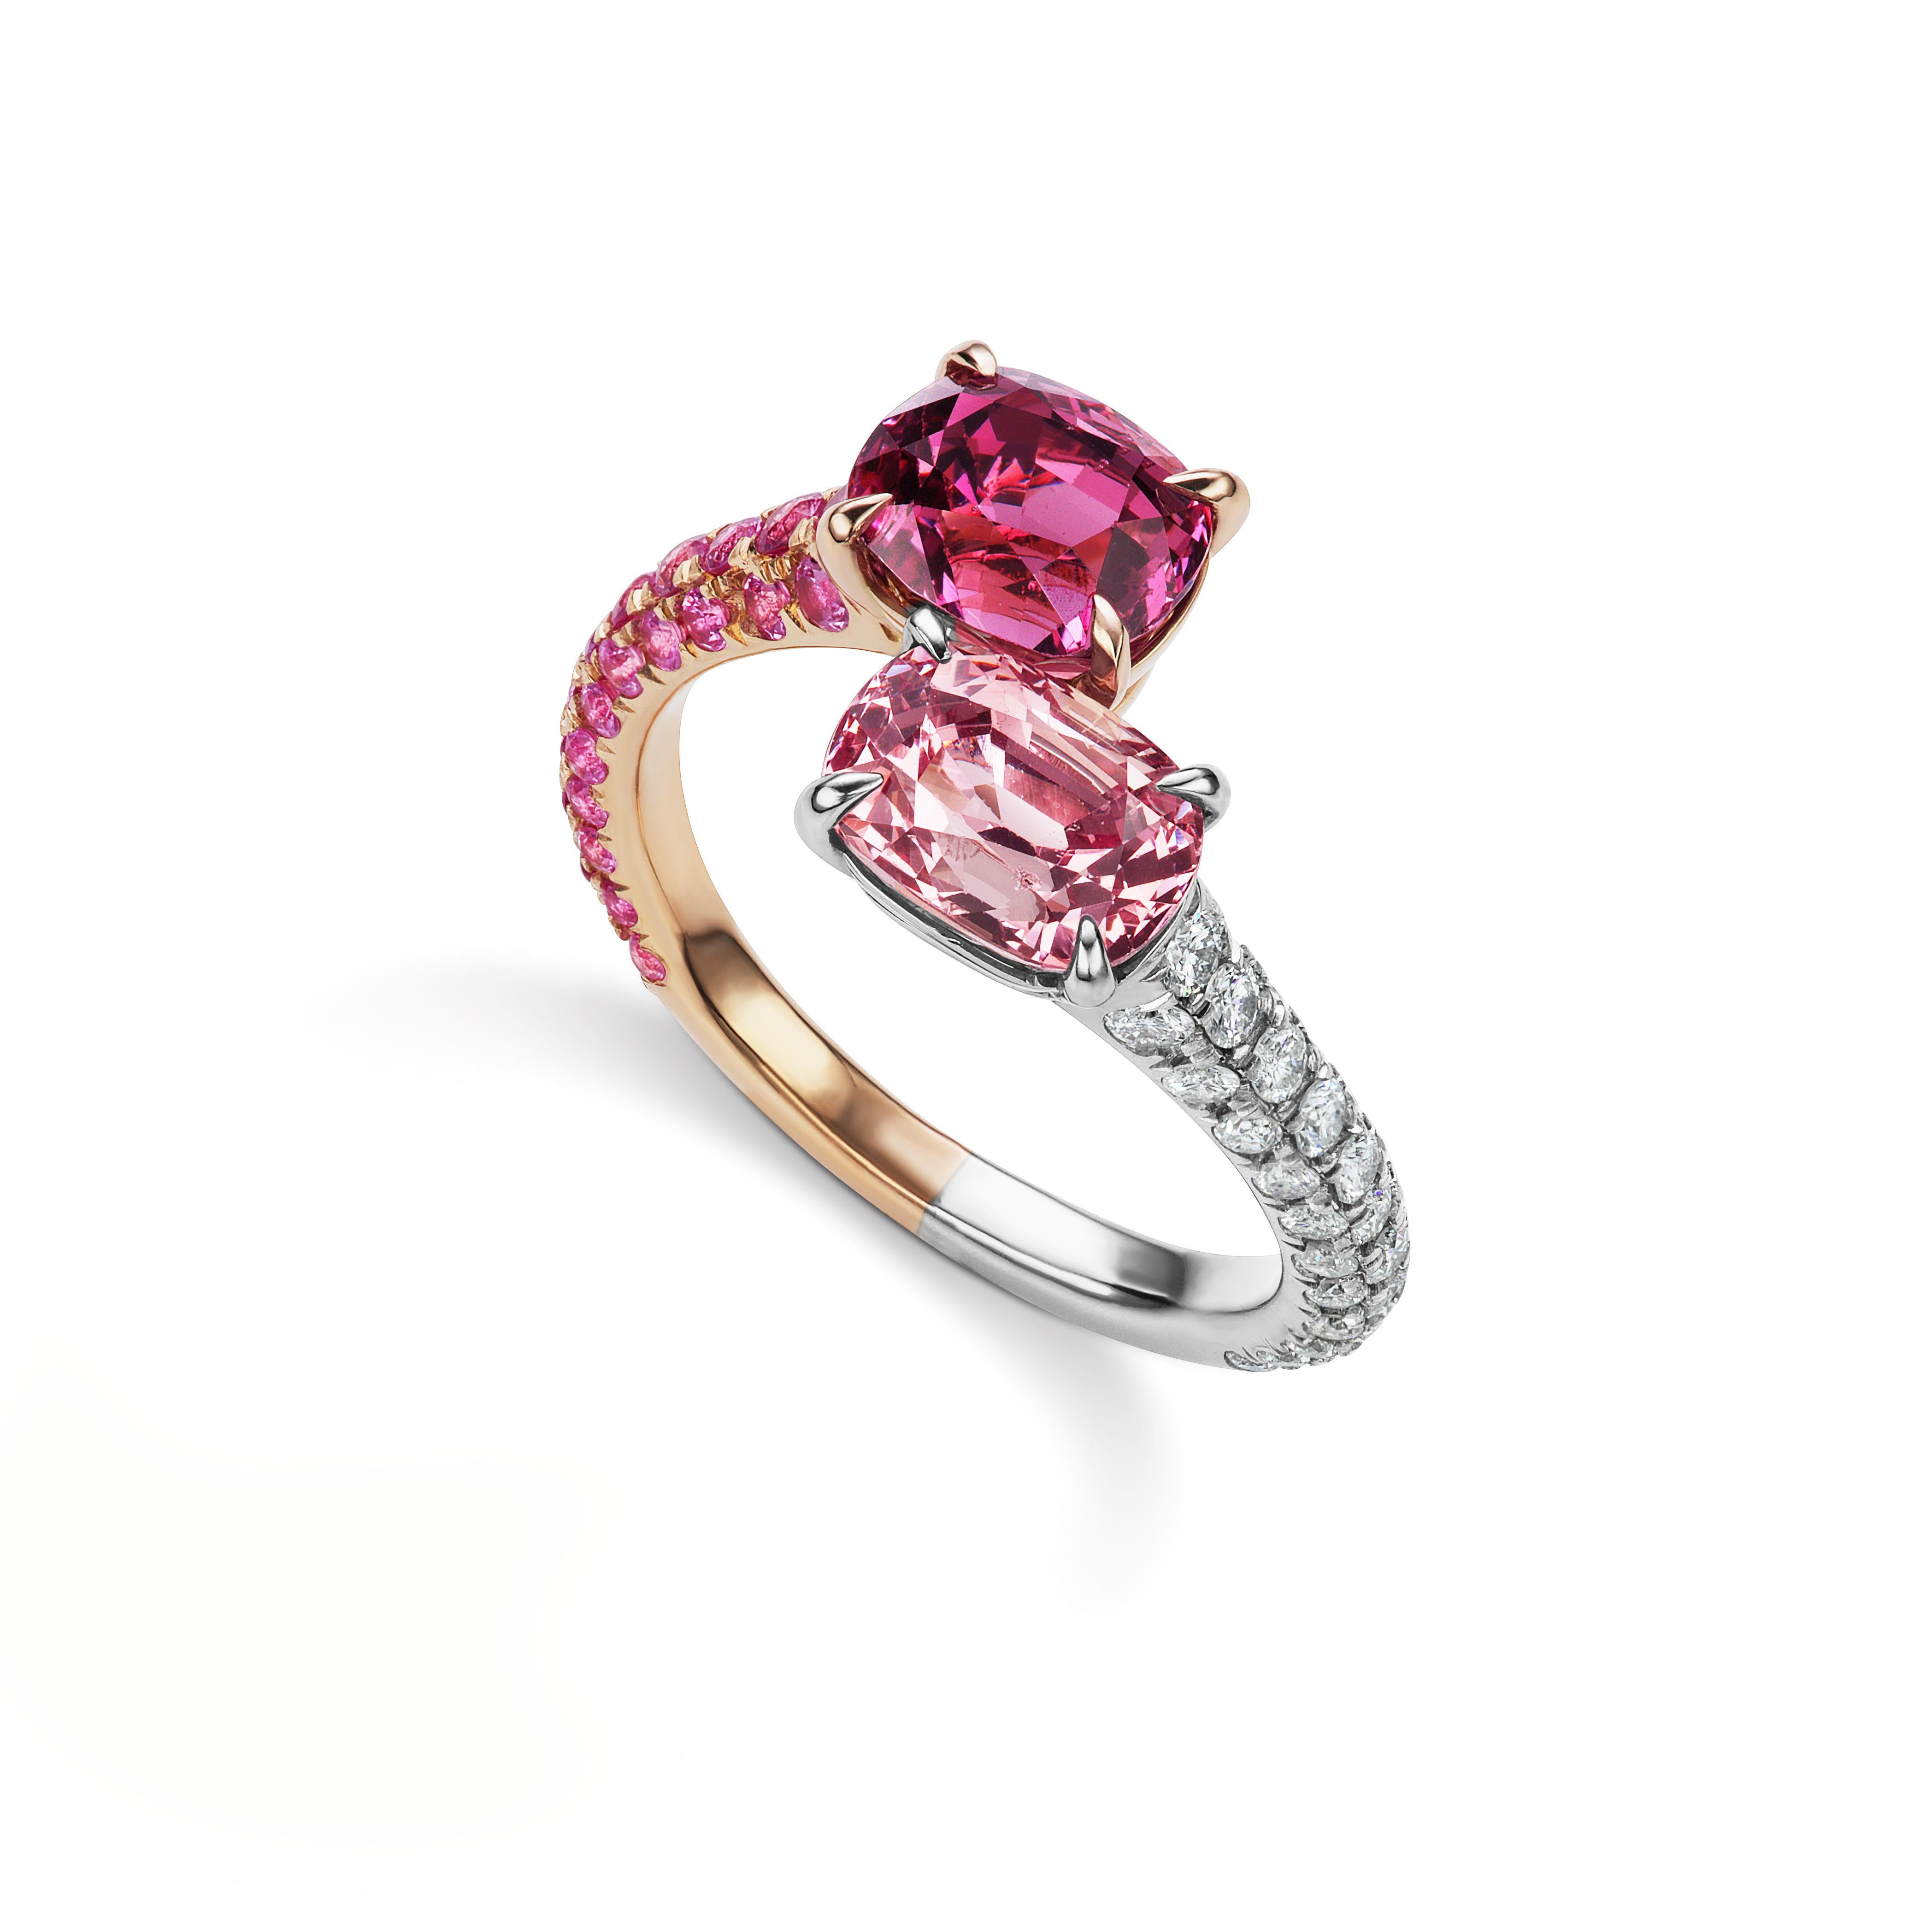 Toi Et Moi Ring: Two lovely pink spinels shine like two halves of one soul

The Design: Two become one in this romantic ring set with two lovely pink spinels that complement each other perfectly. Two stone rings are called “Toi et Moi” rings, French